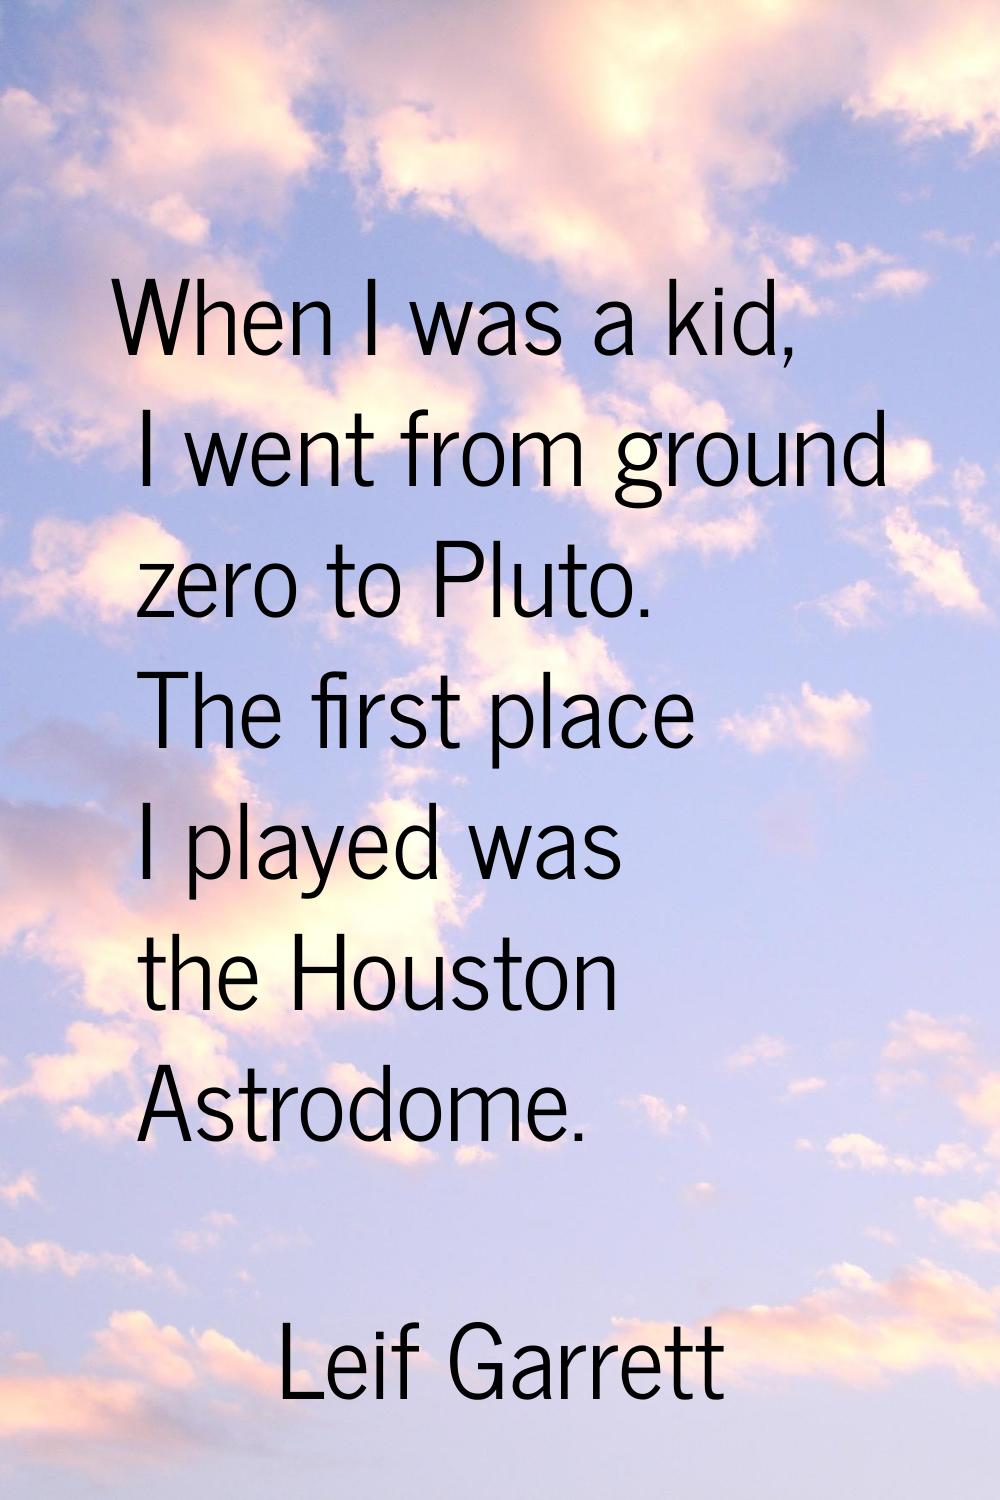 When I was a kid, I went from ground zero to Pluto. The first place I played was the Houston Astrod